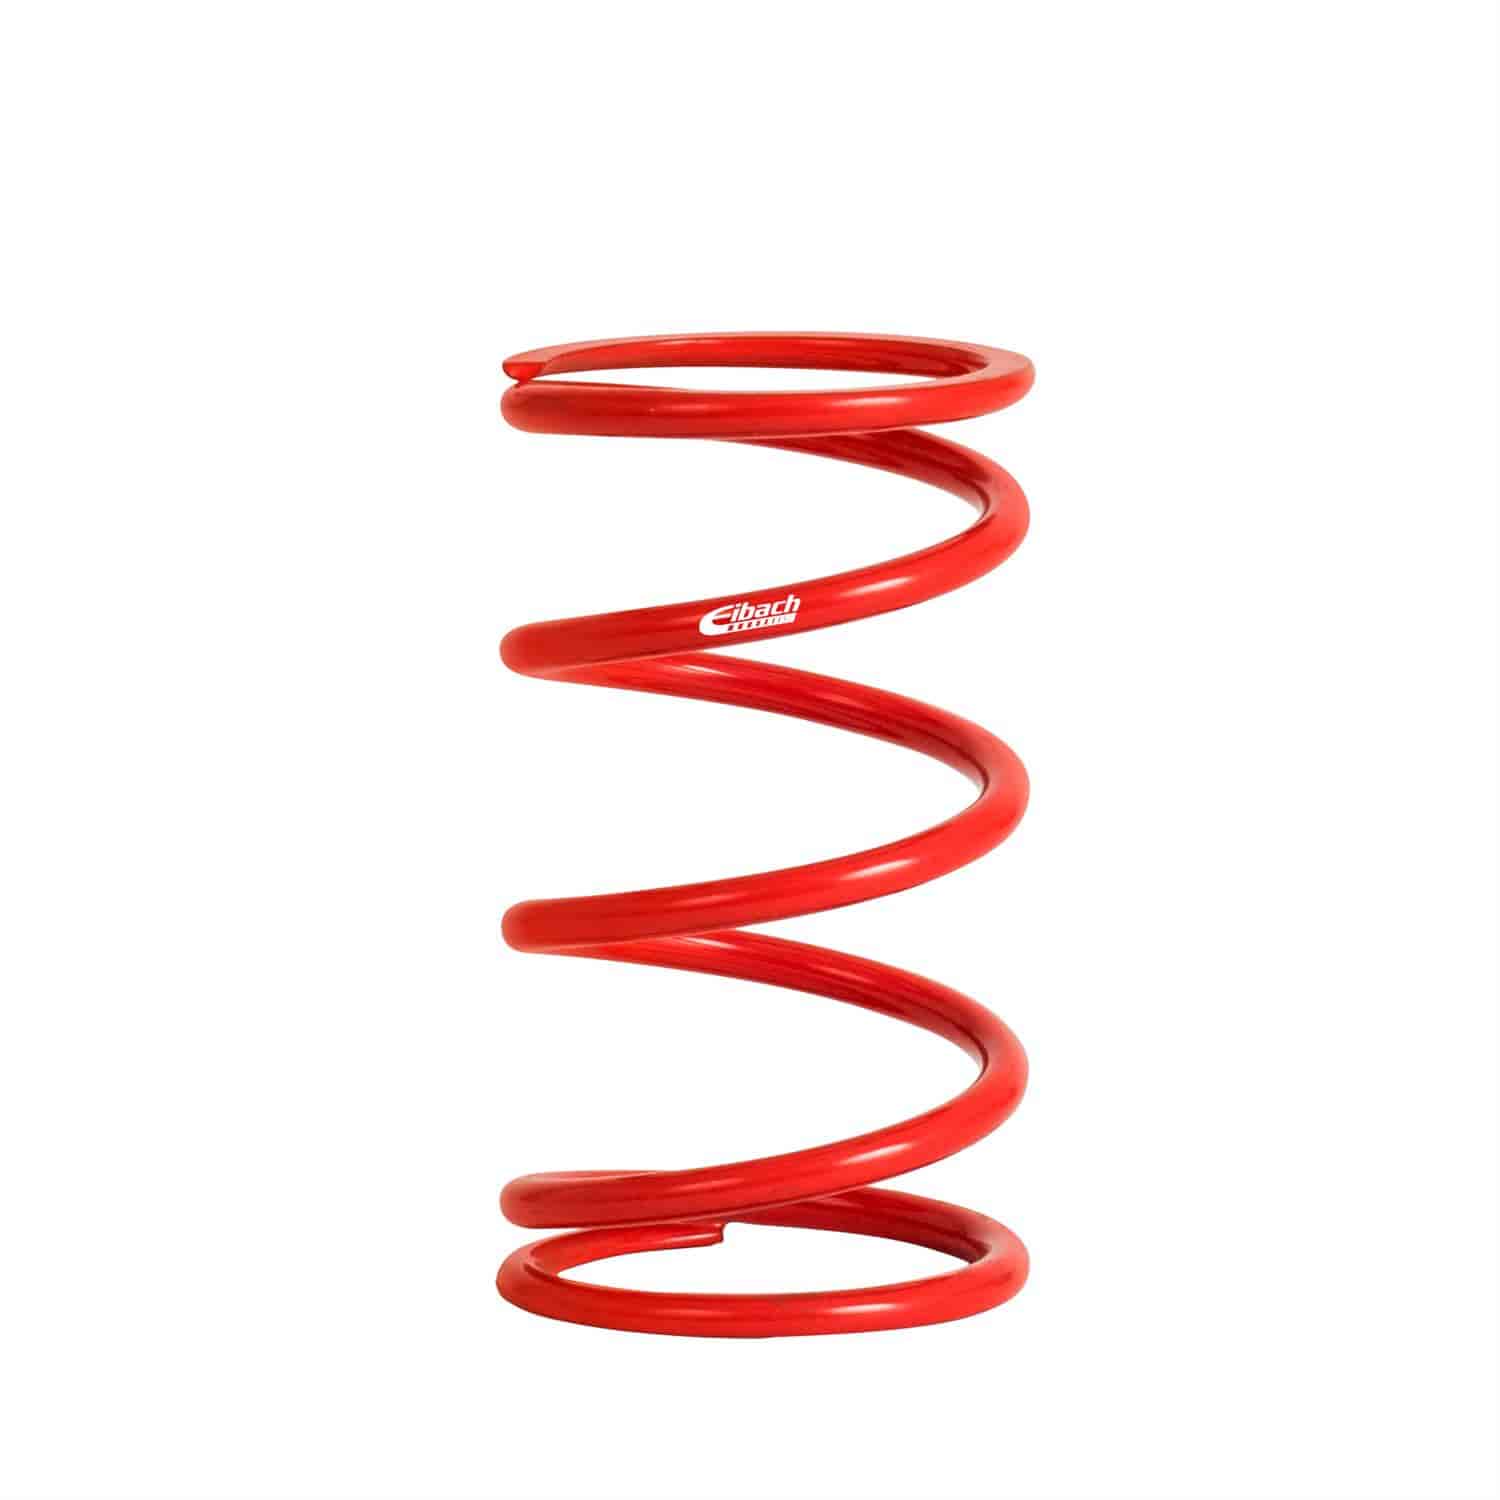 1050.550.0300 EIBACH CONVENTIONAL FRONT SPRING